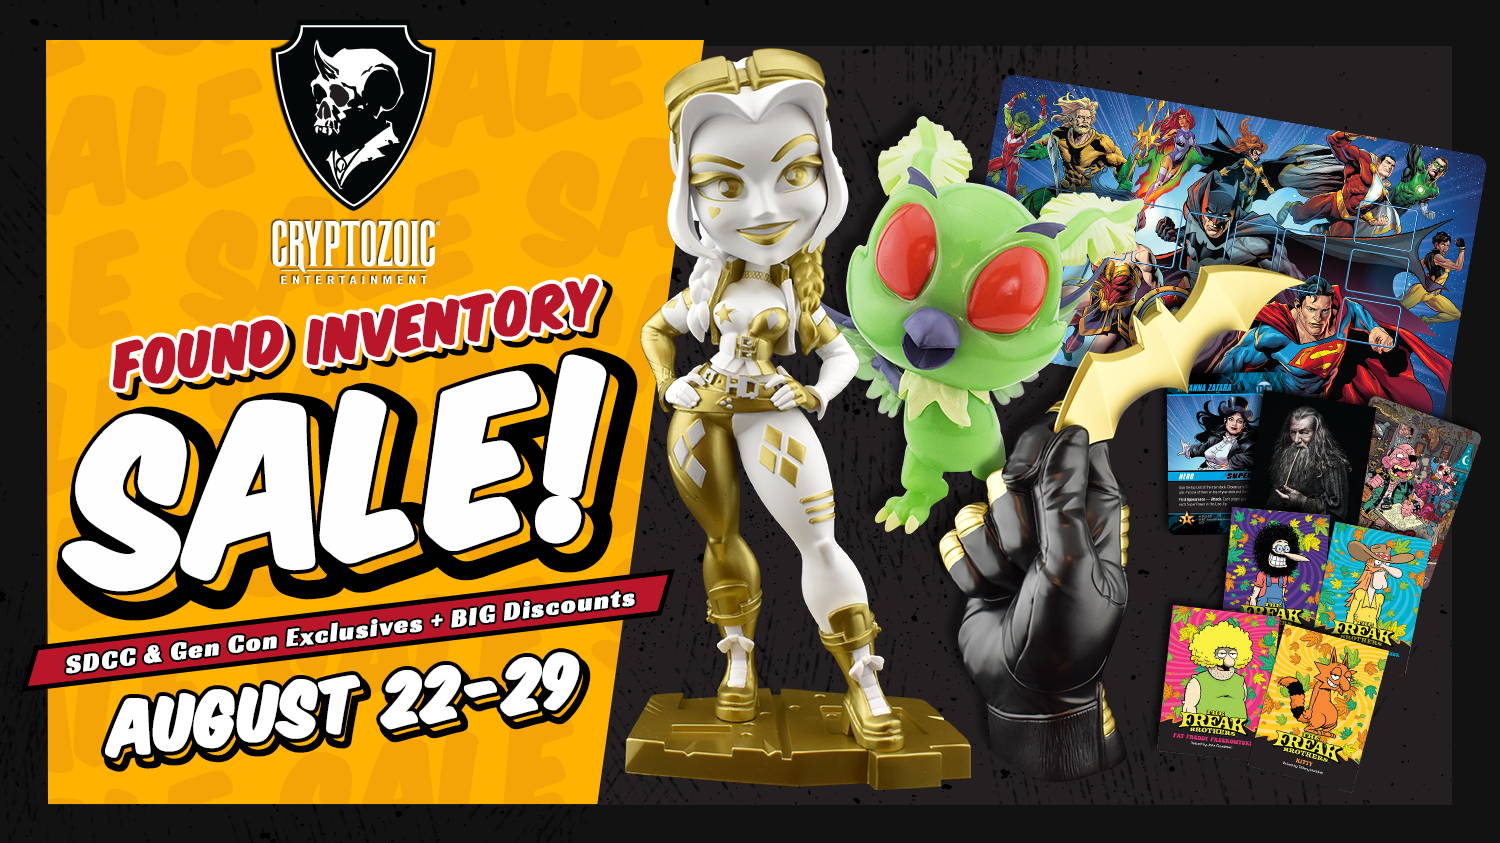 Found Inventory Sale: SDCC and Gen Con Exclusives & Big Discounts (August 22-29)